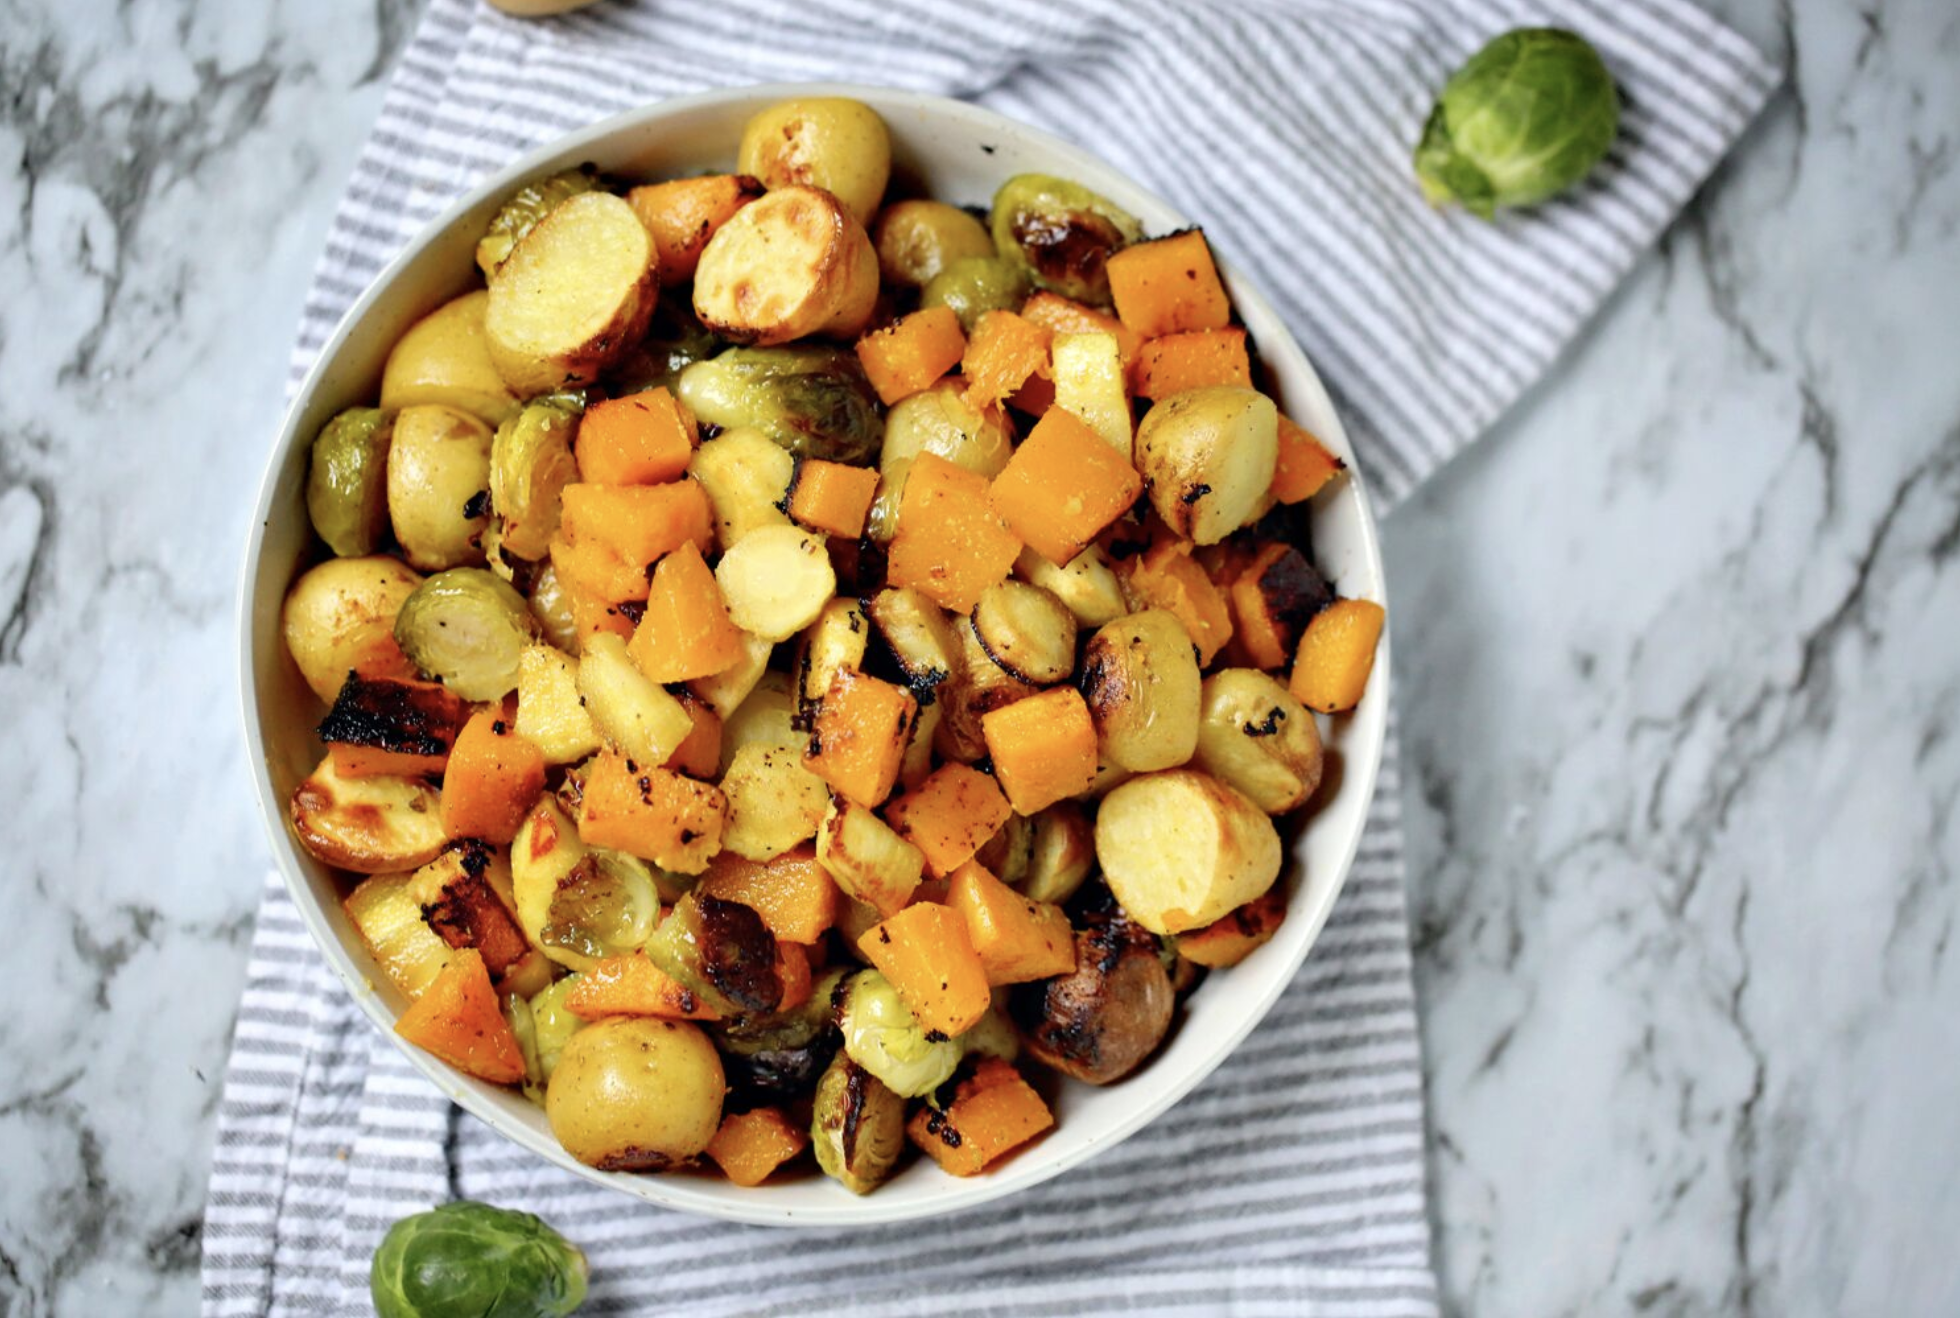 This Sheet Pan Roasted Vegetables recipe is the perfect side dish that's great any time of the year but especially in the cooler Fall and winter seasons! Get the full recipe @ www.hipmamasplace.com #ad #BetterThan #IC